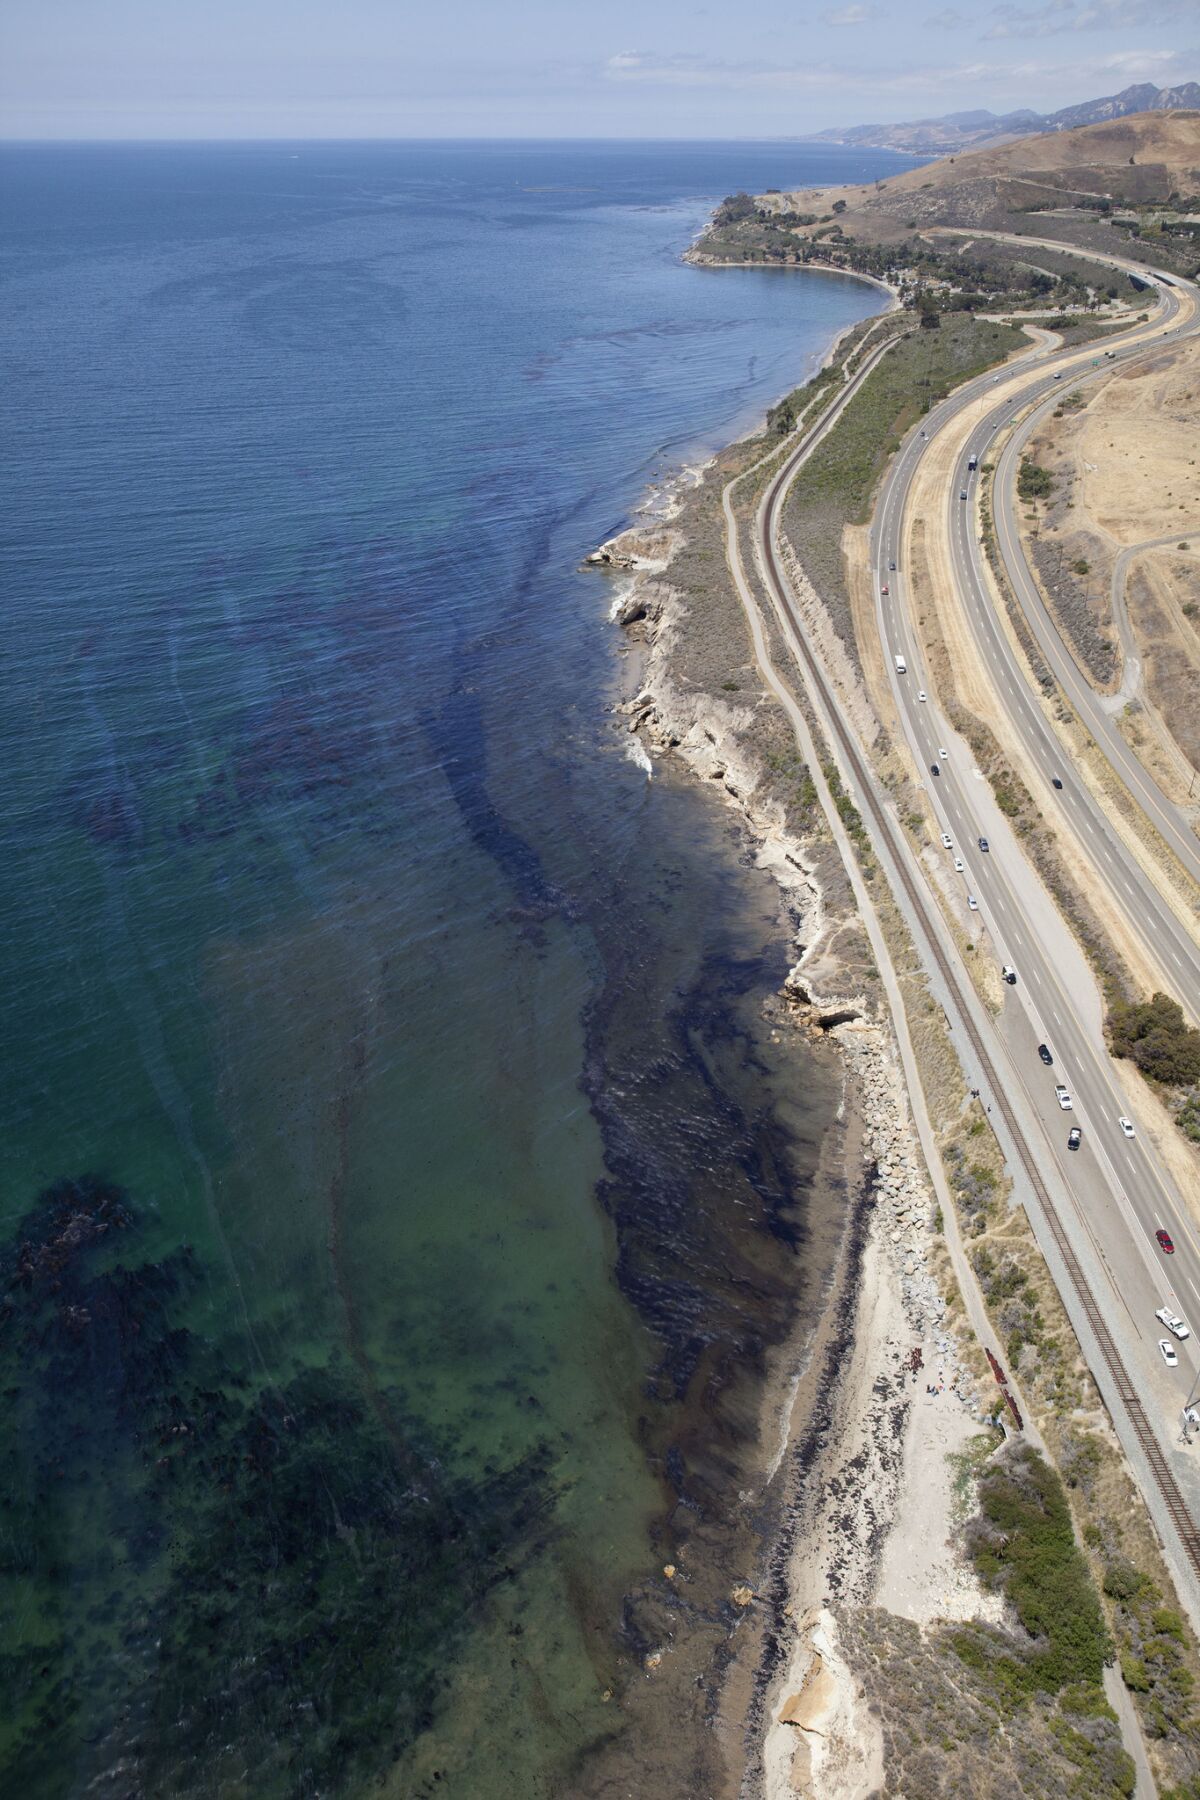 SANTA BARBARA, CALIF. -- WEDNESDAY, MAY 20, 2015: Oil soaked kelp and oil sheen on the shoreline as cleanup effort continues on the beach in Santa Barbara, Calif., on May 20, 2015. (Brian van der Brug / Los Angeles Times)